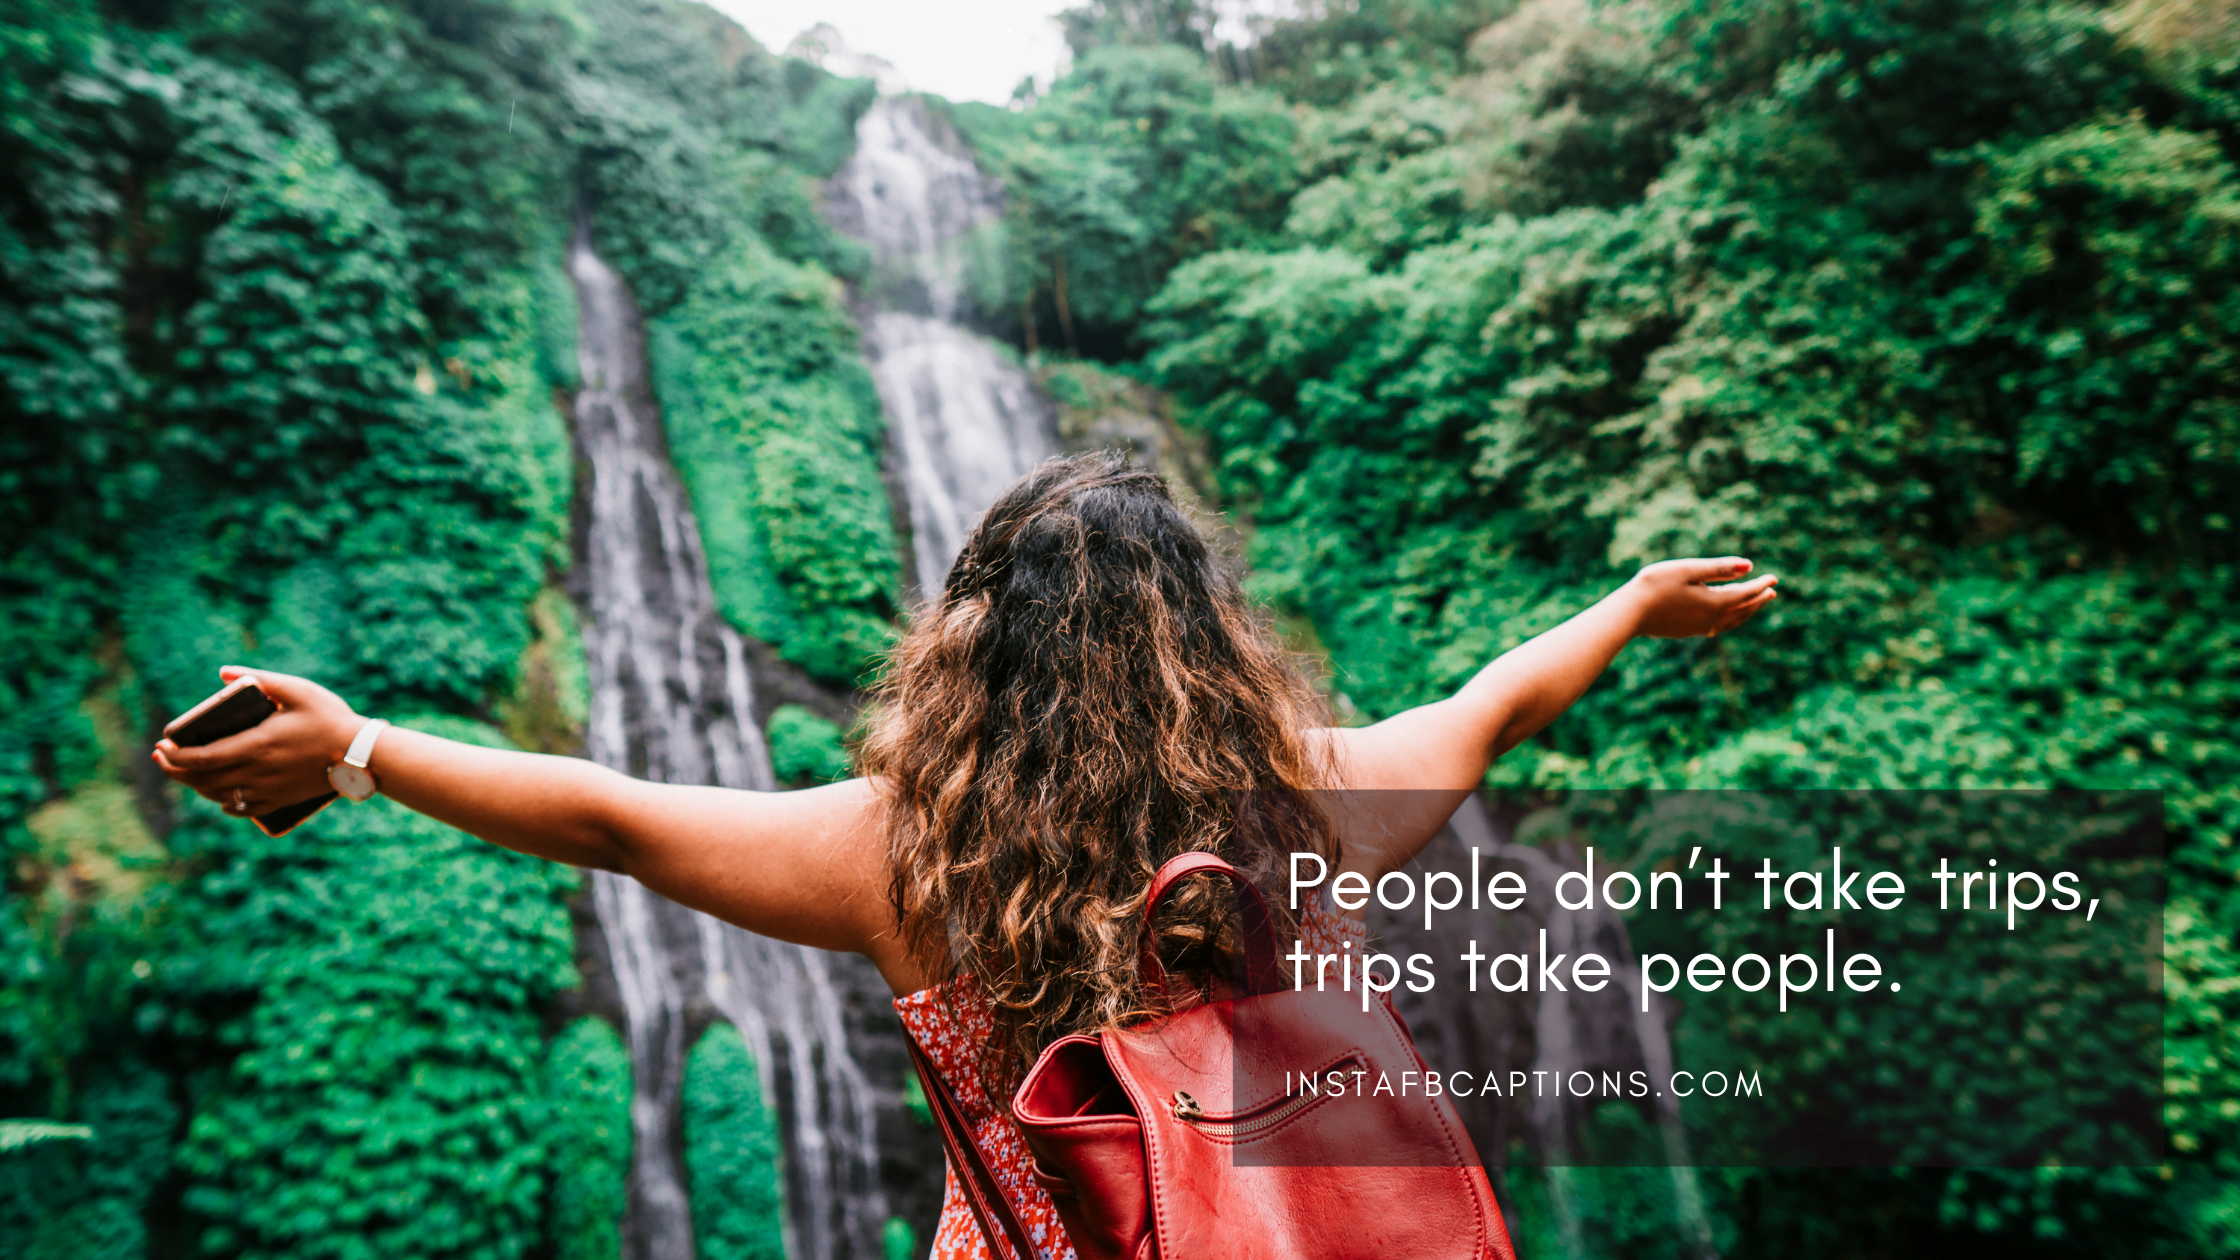 Short Travel Captions  - Short Travel Captions - Best TRAVEL Instagram Captions for your 2022 Trip